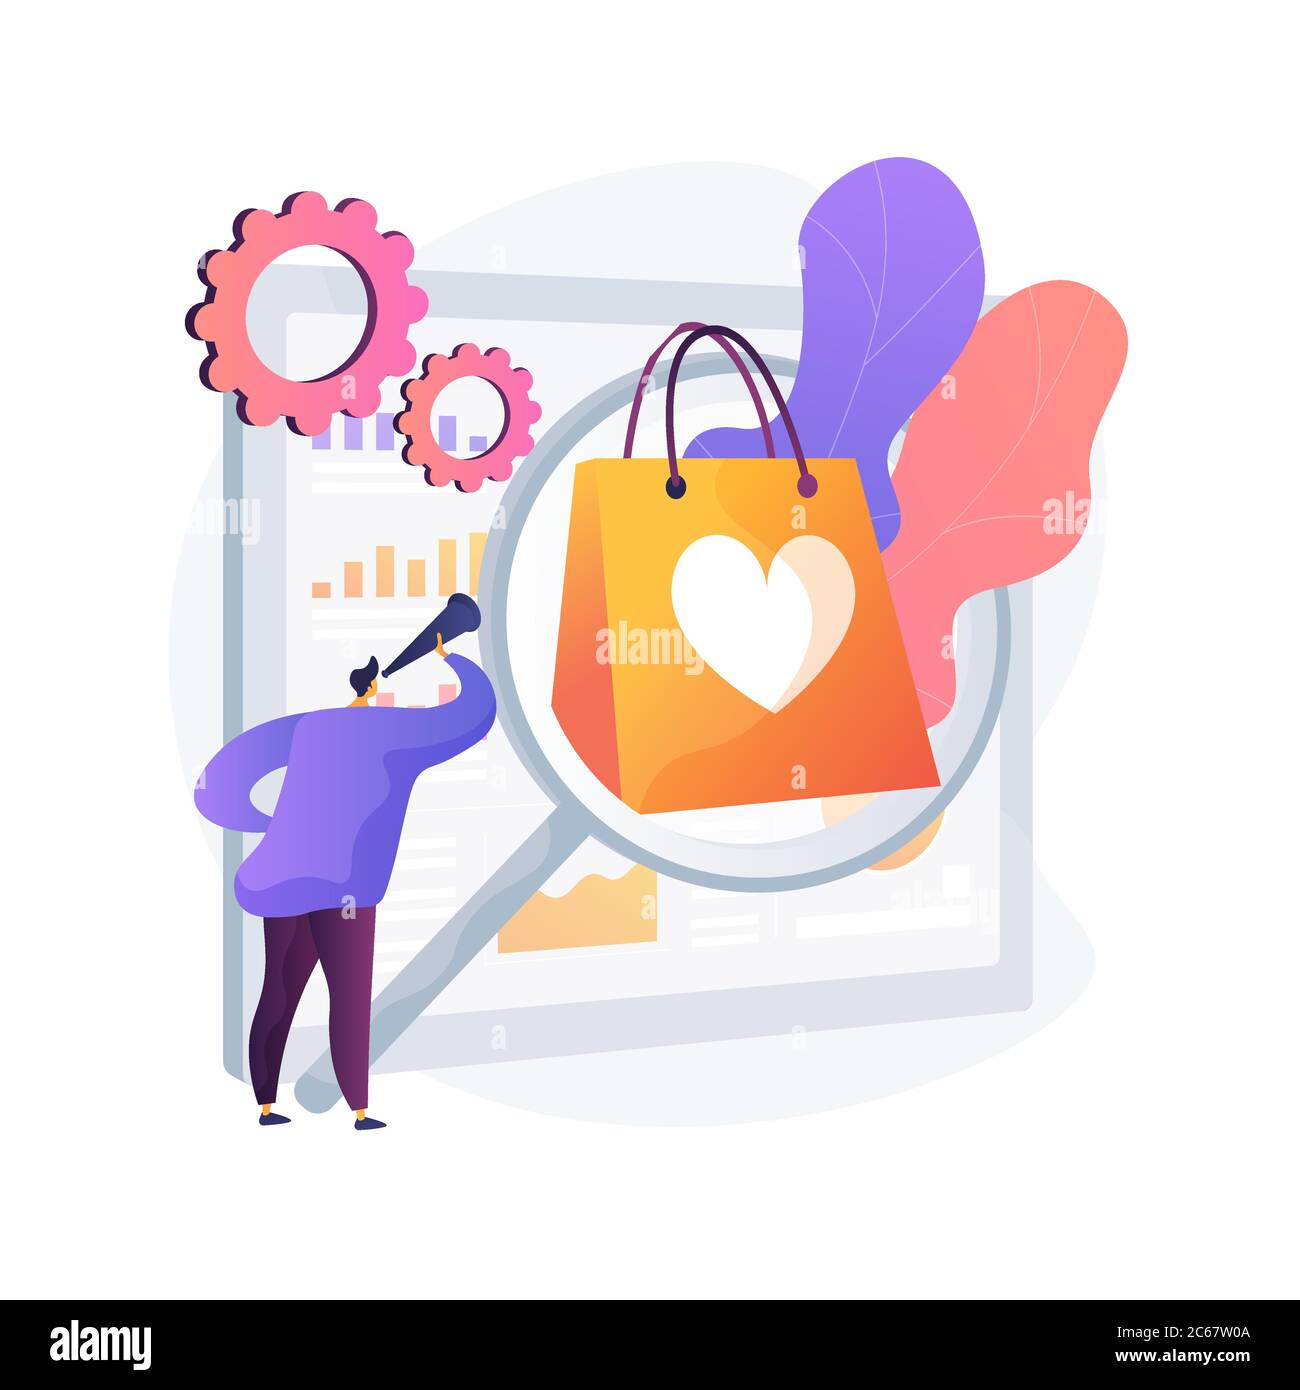 Market Research Studies Abstract Concept Vector Illustration Stock